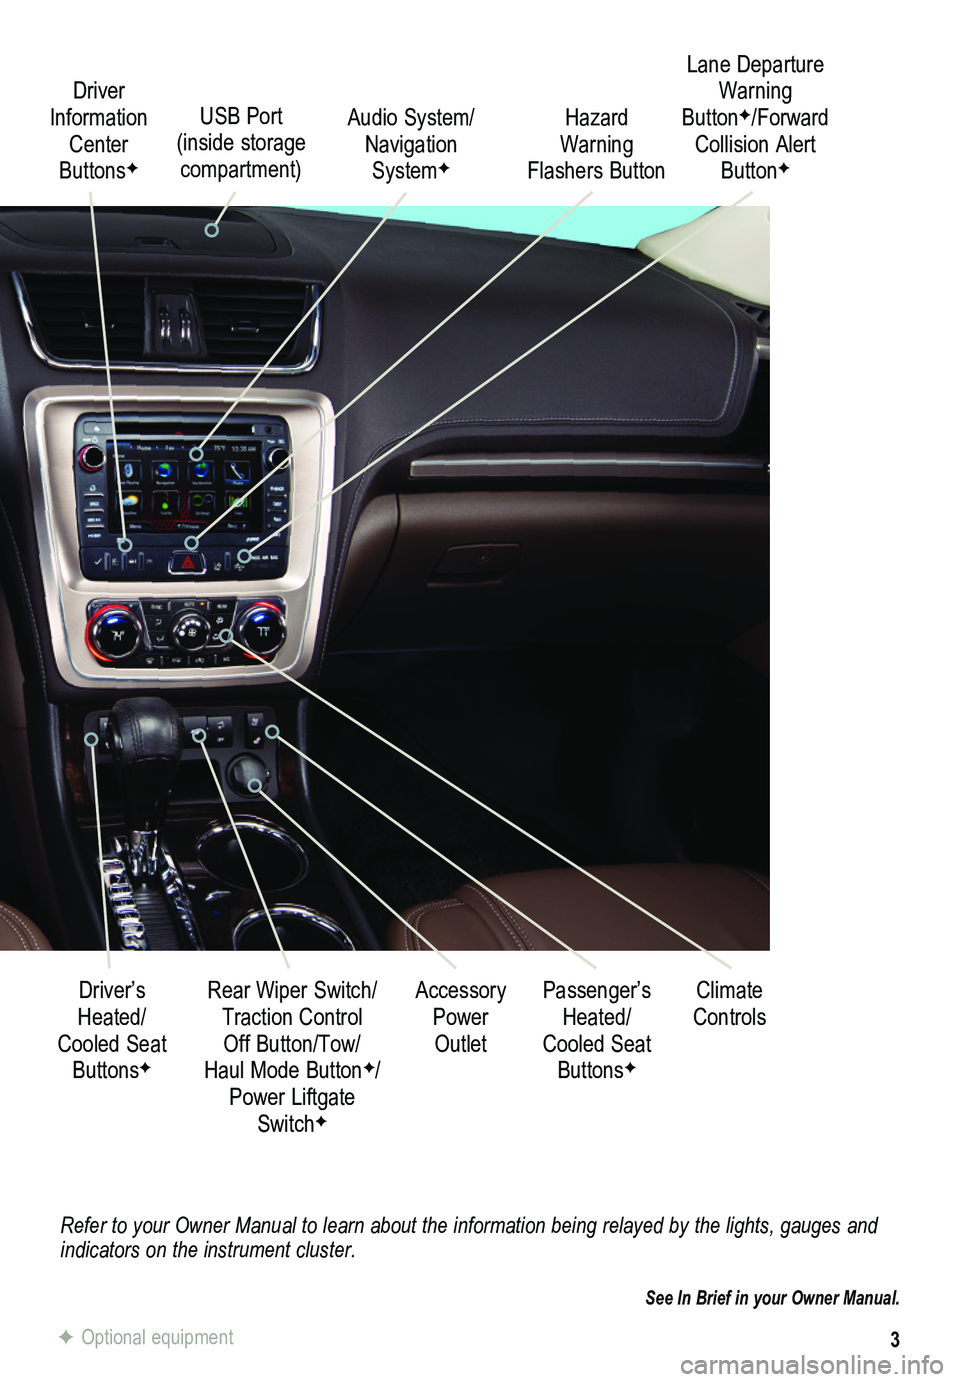 GMC ACADIA 2014  Get To Know Guide 3
Refer to your Owner Manual to learn about the information being relayed \
by the lights, gauges and indicators on the instrument cluster.
See In Brief in your Owner Manual.
Driver Information Center